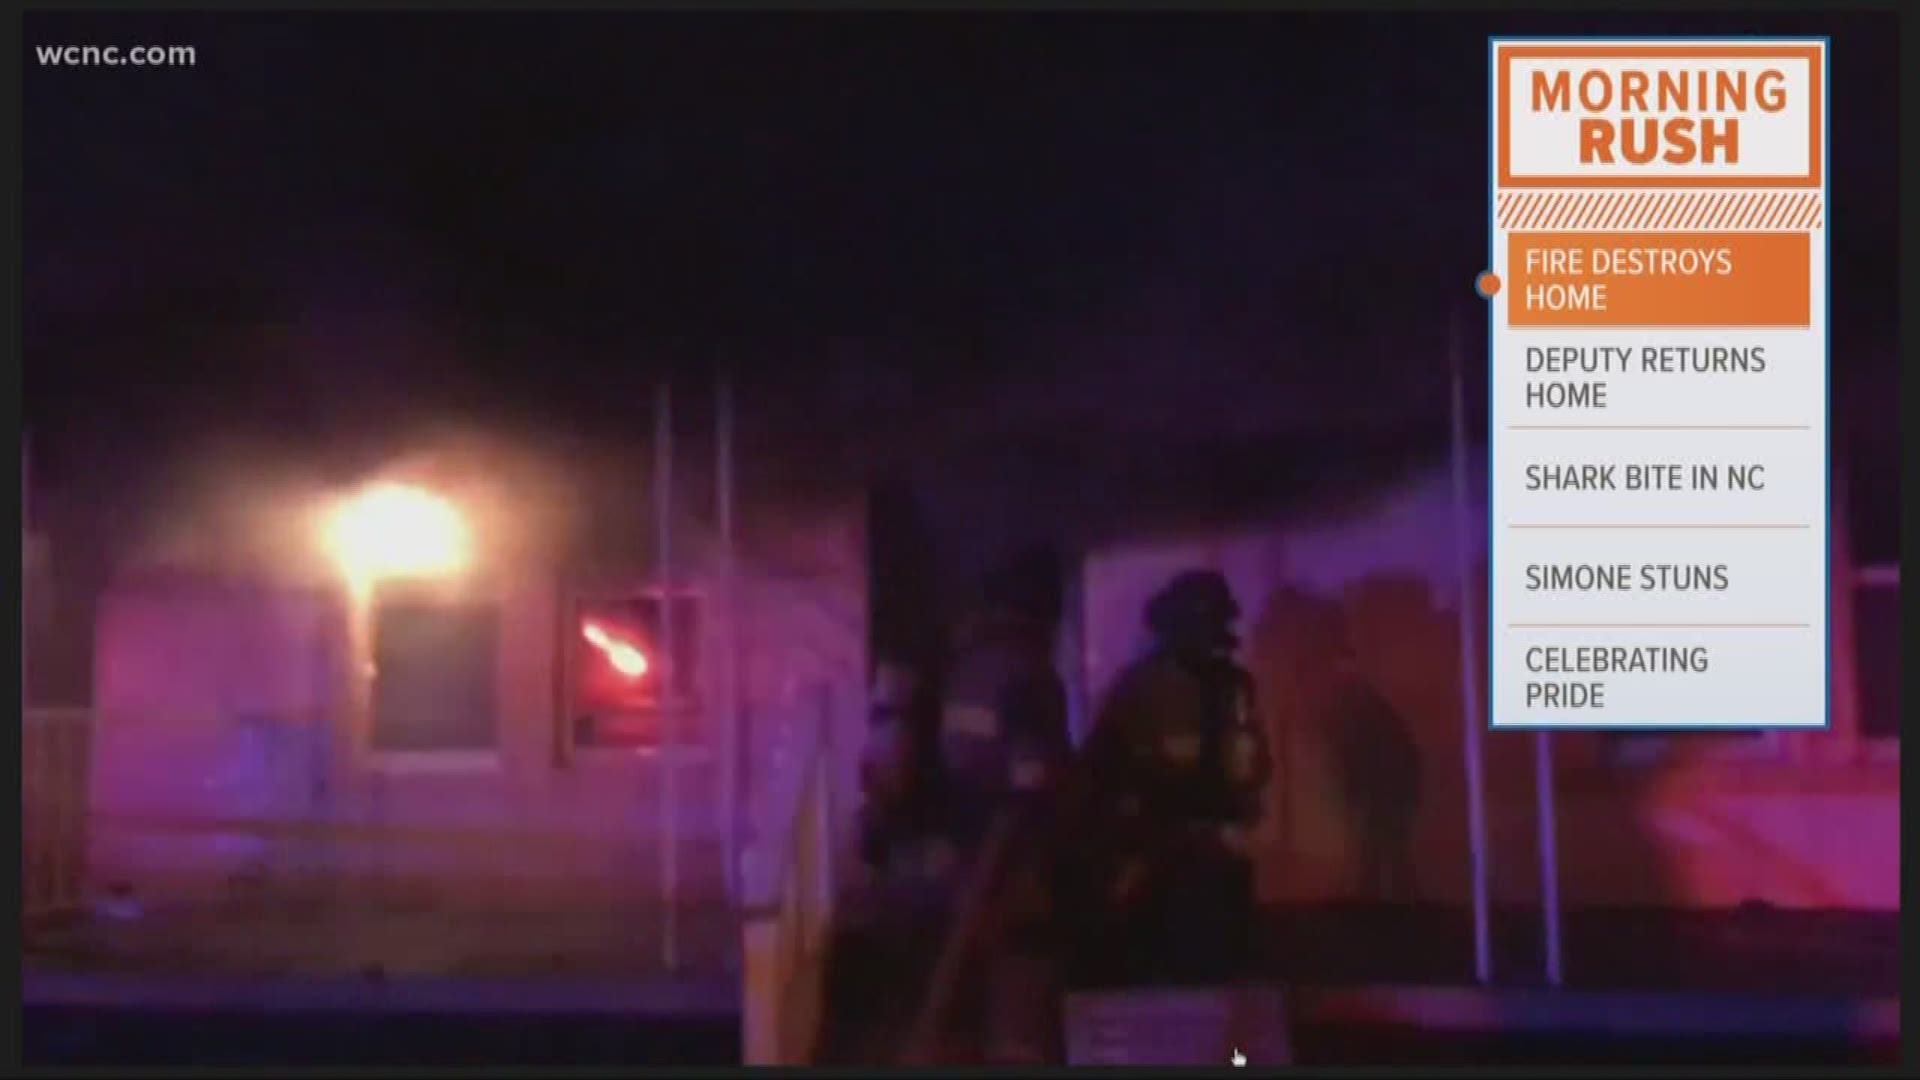 A house in Gastonia went up in flames overnight.